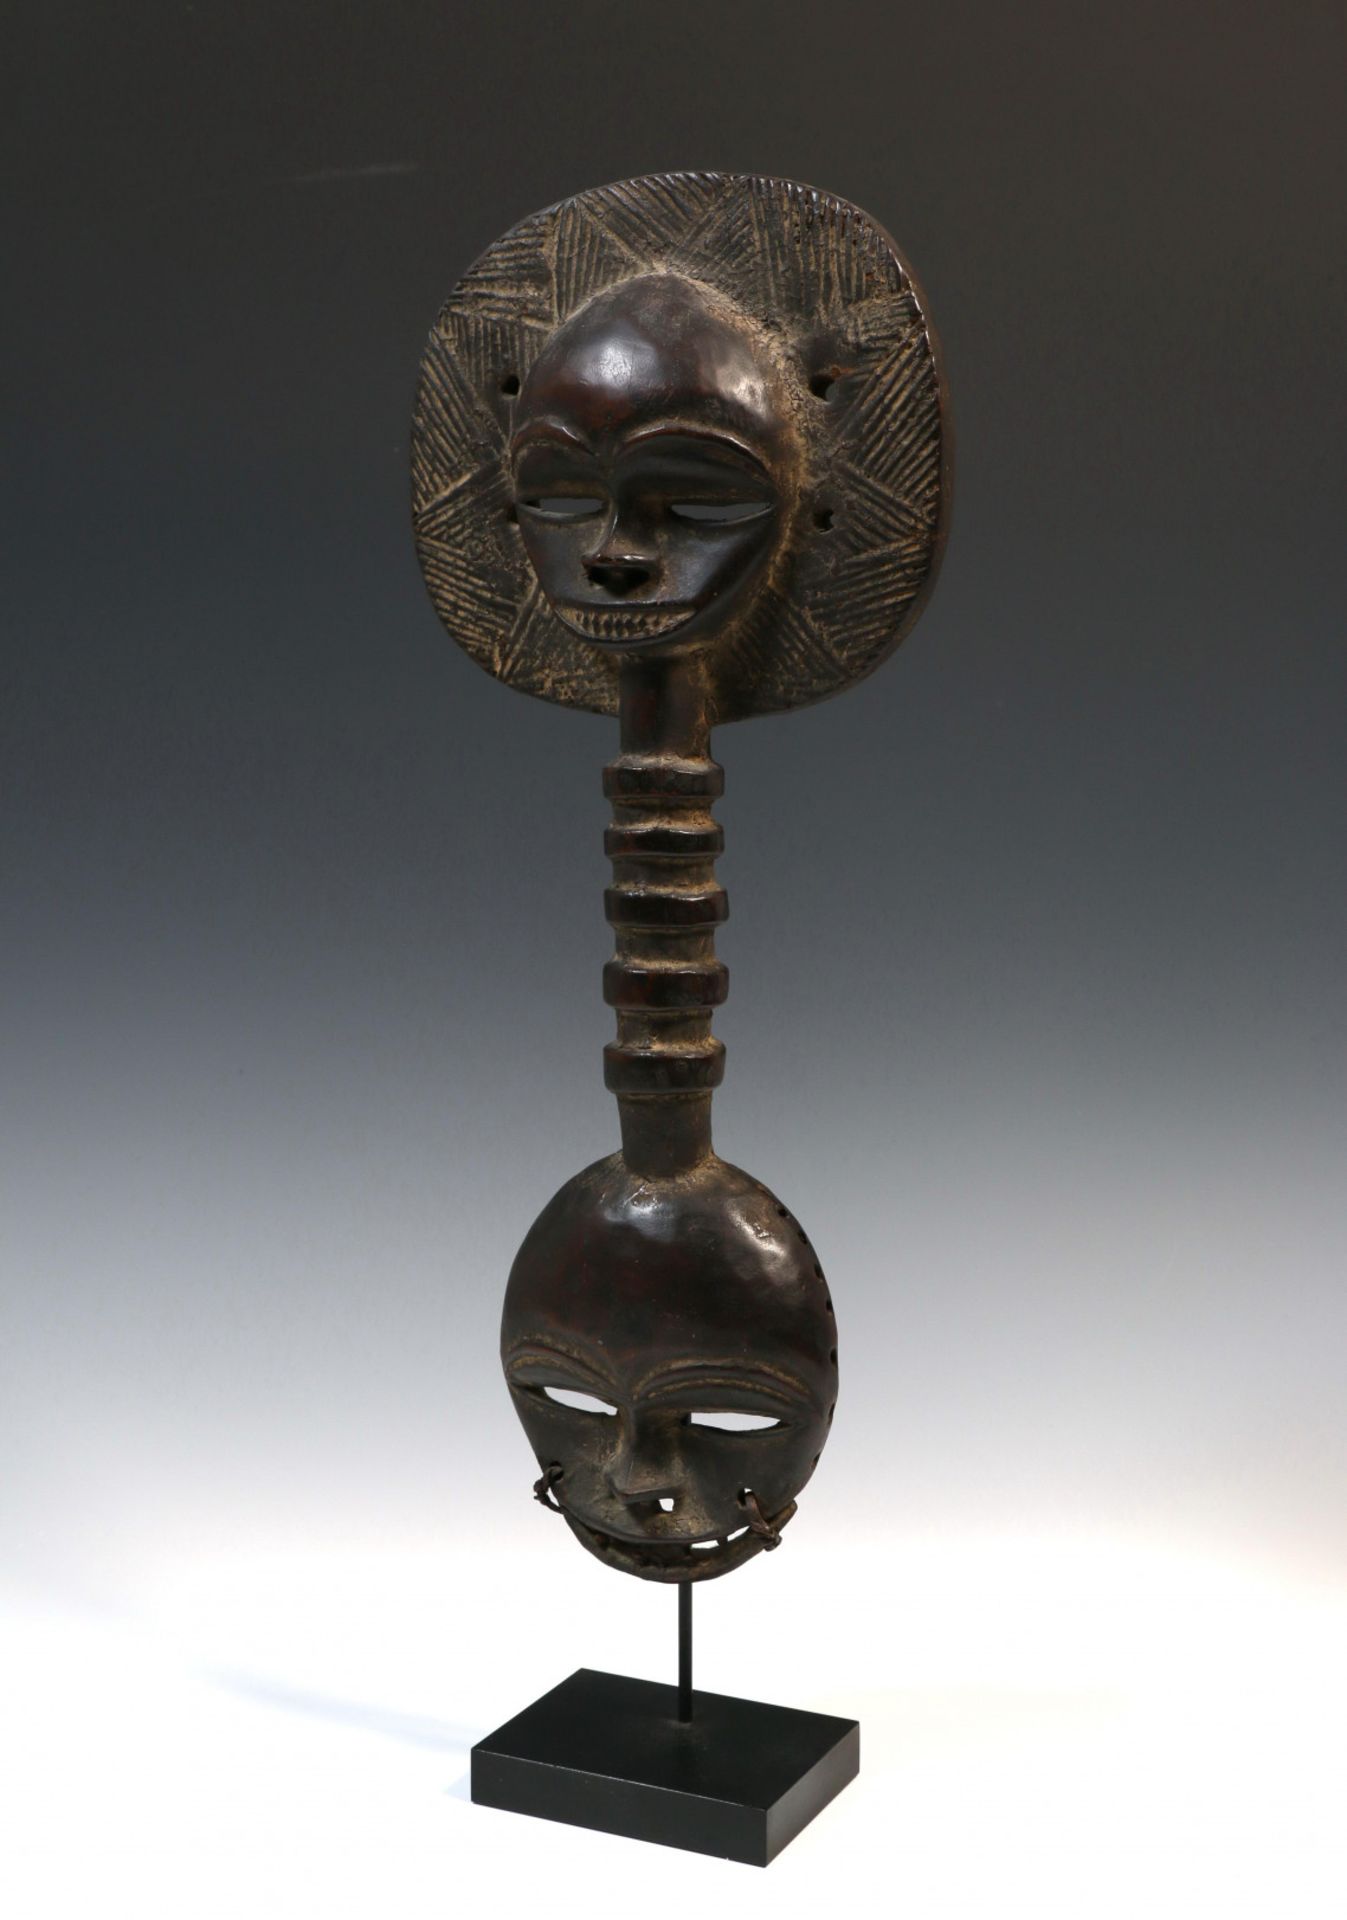 Nigeria, Eket, ceremonial scepter, possibly old, and West Africa, ceremonial staff, decorated with m